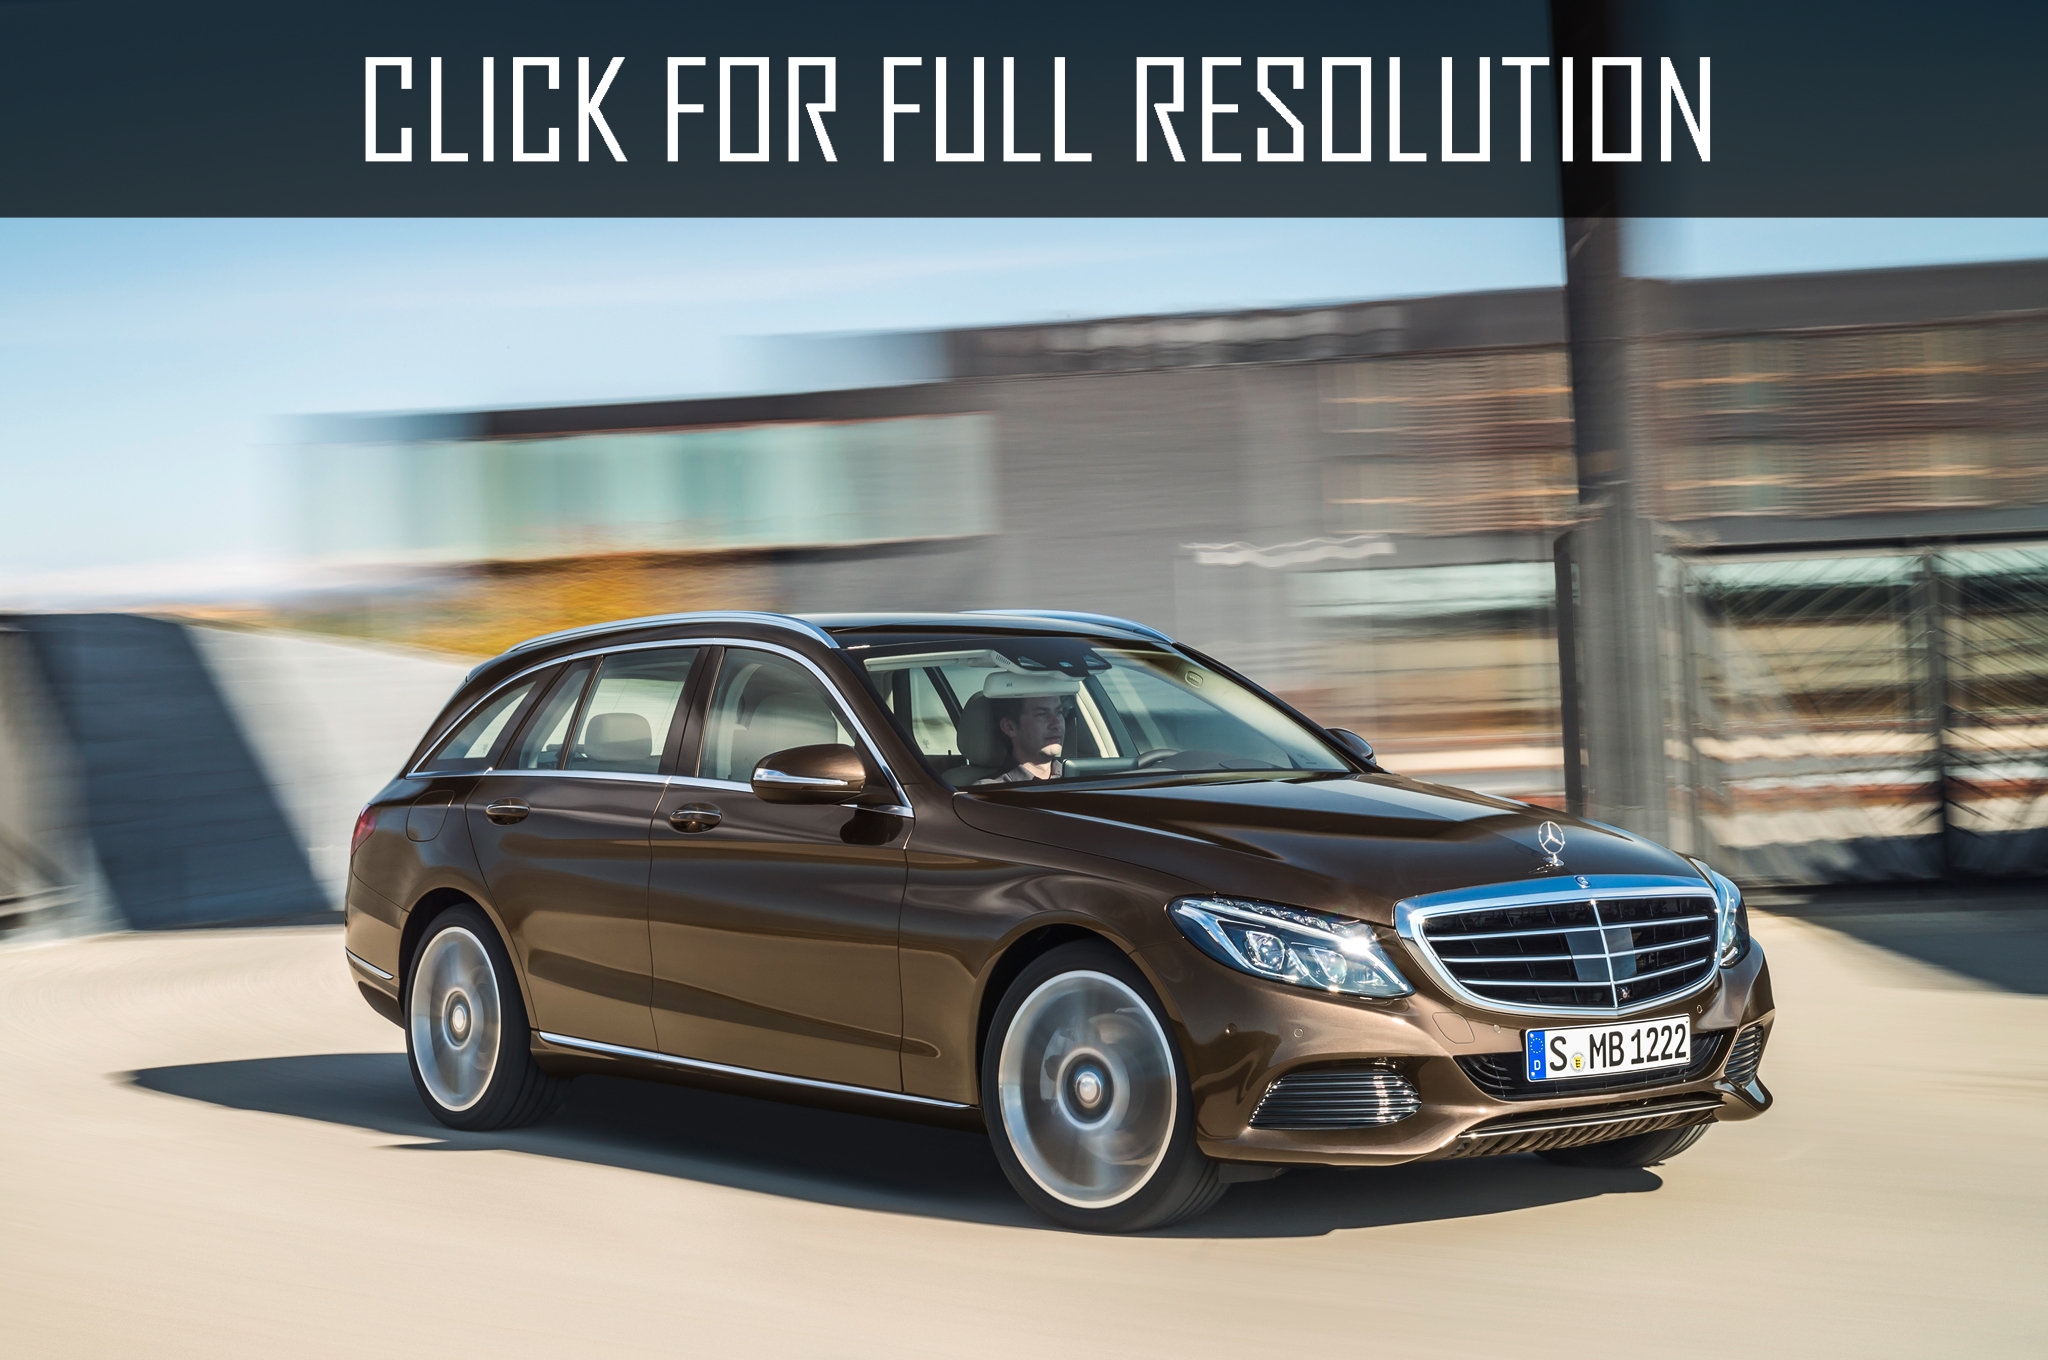 Mercedes Benz C Class Wagon amazing photo gallery, some information